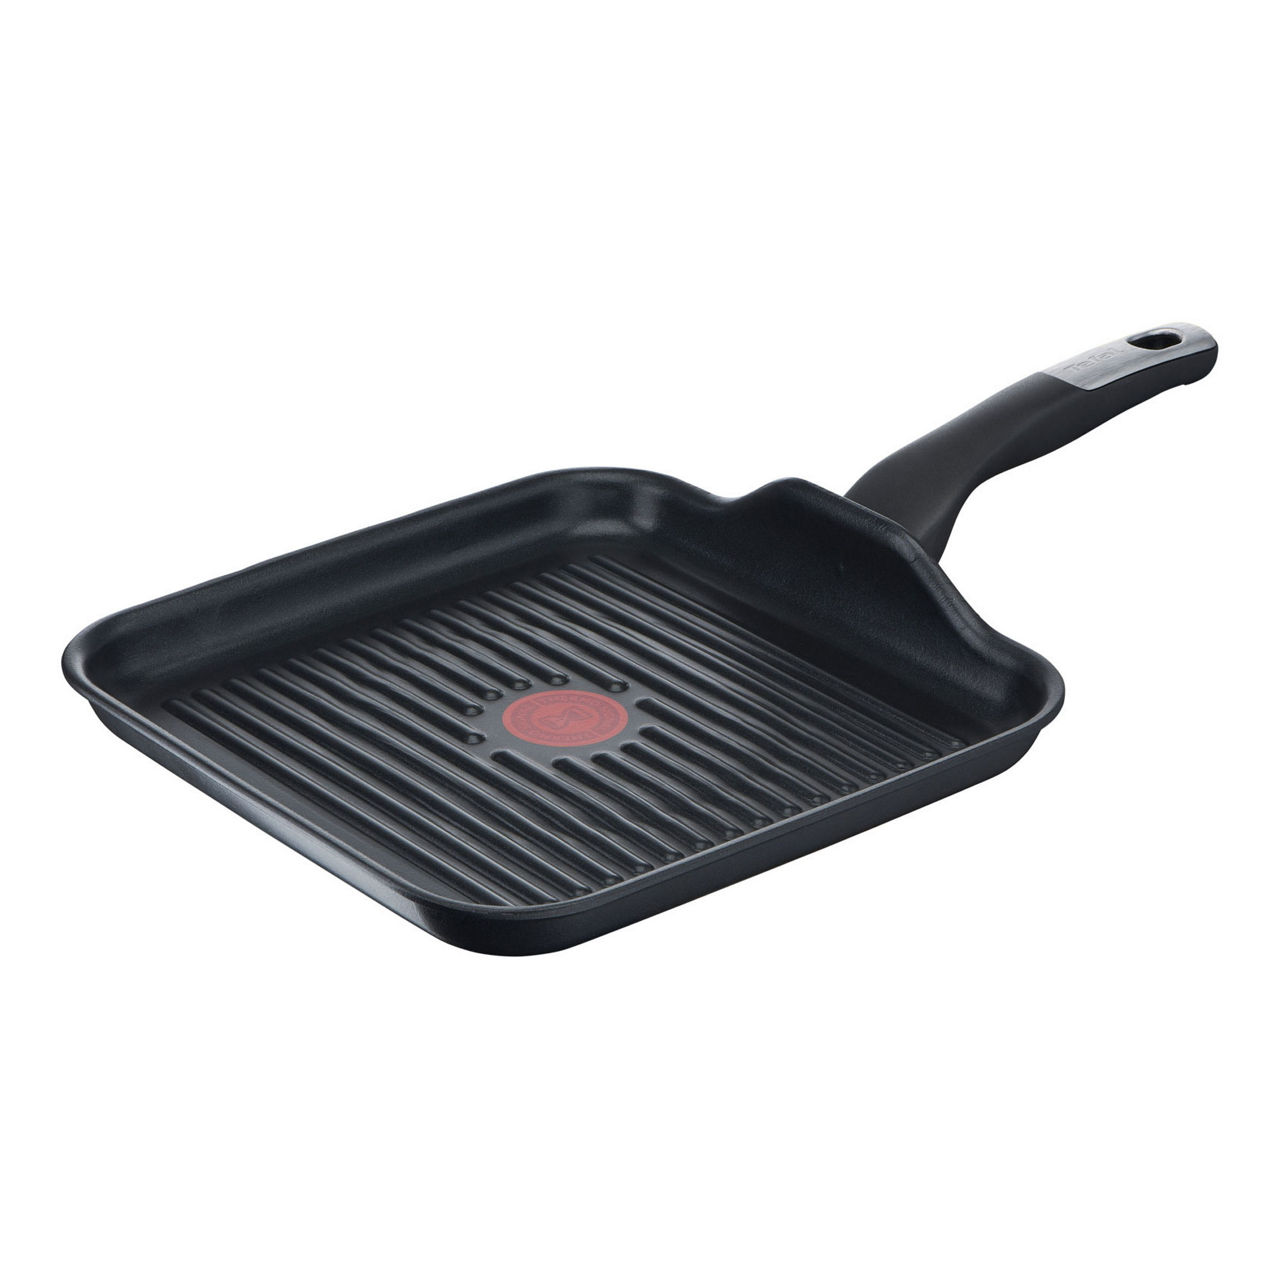 Tefal Unlimited Non-stick Induction Frypan 32cm In Black